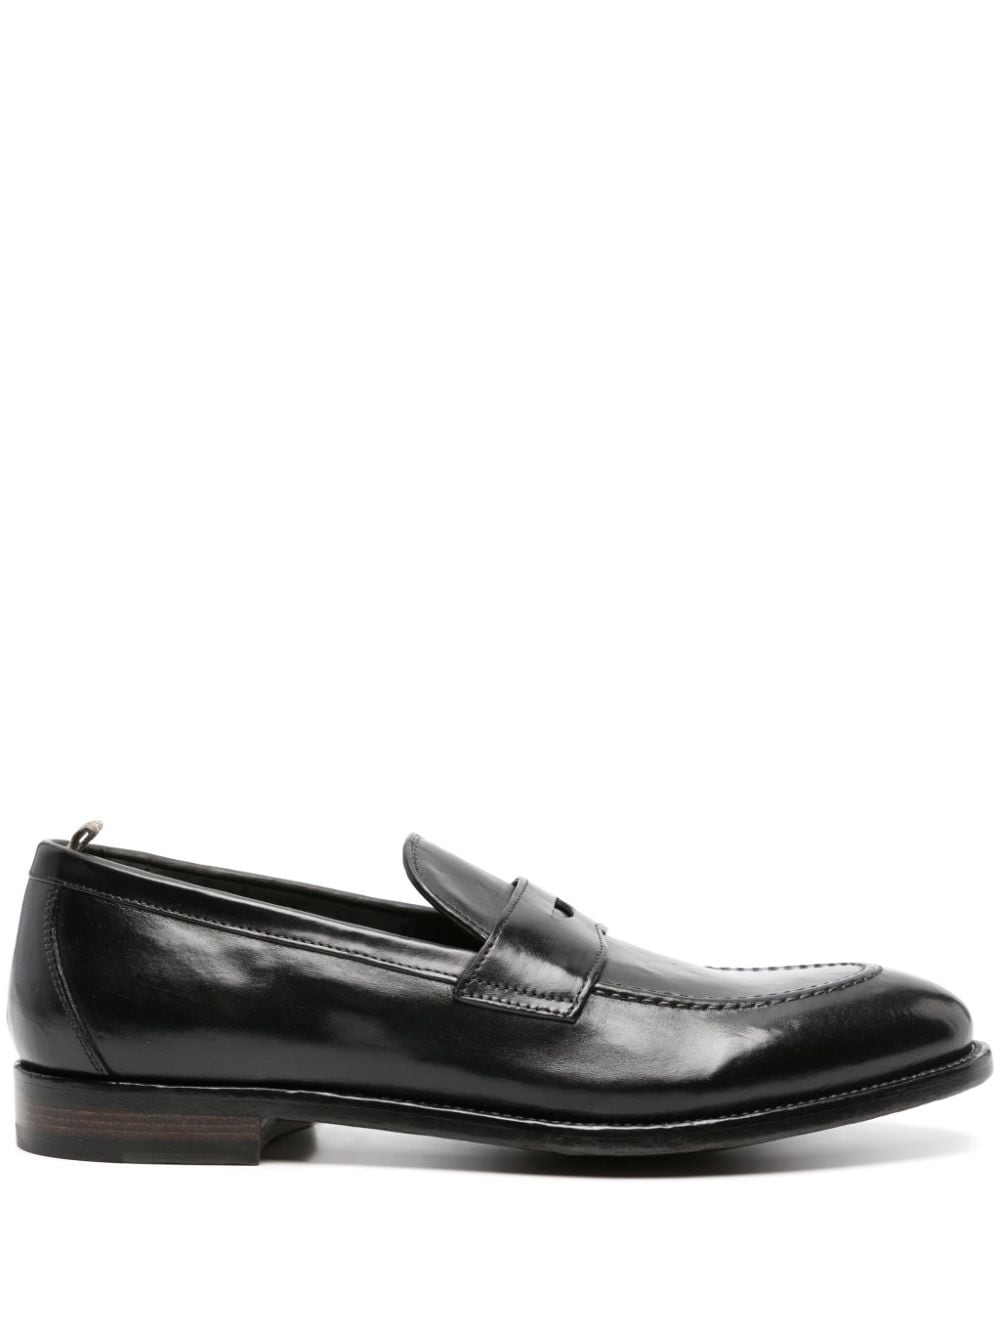 Officine Creative Tulane 003 leather penny loafers - Nero